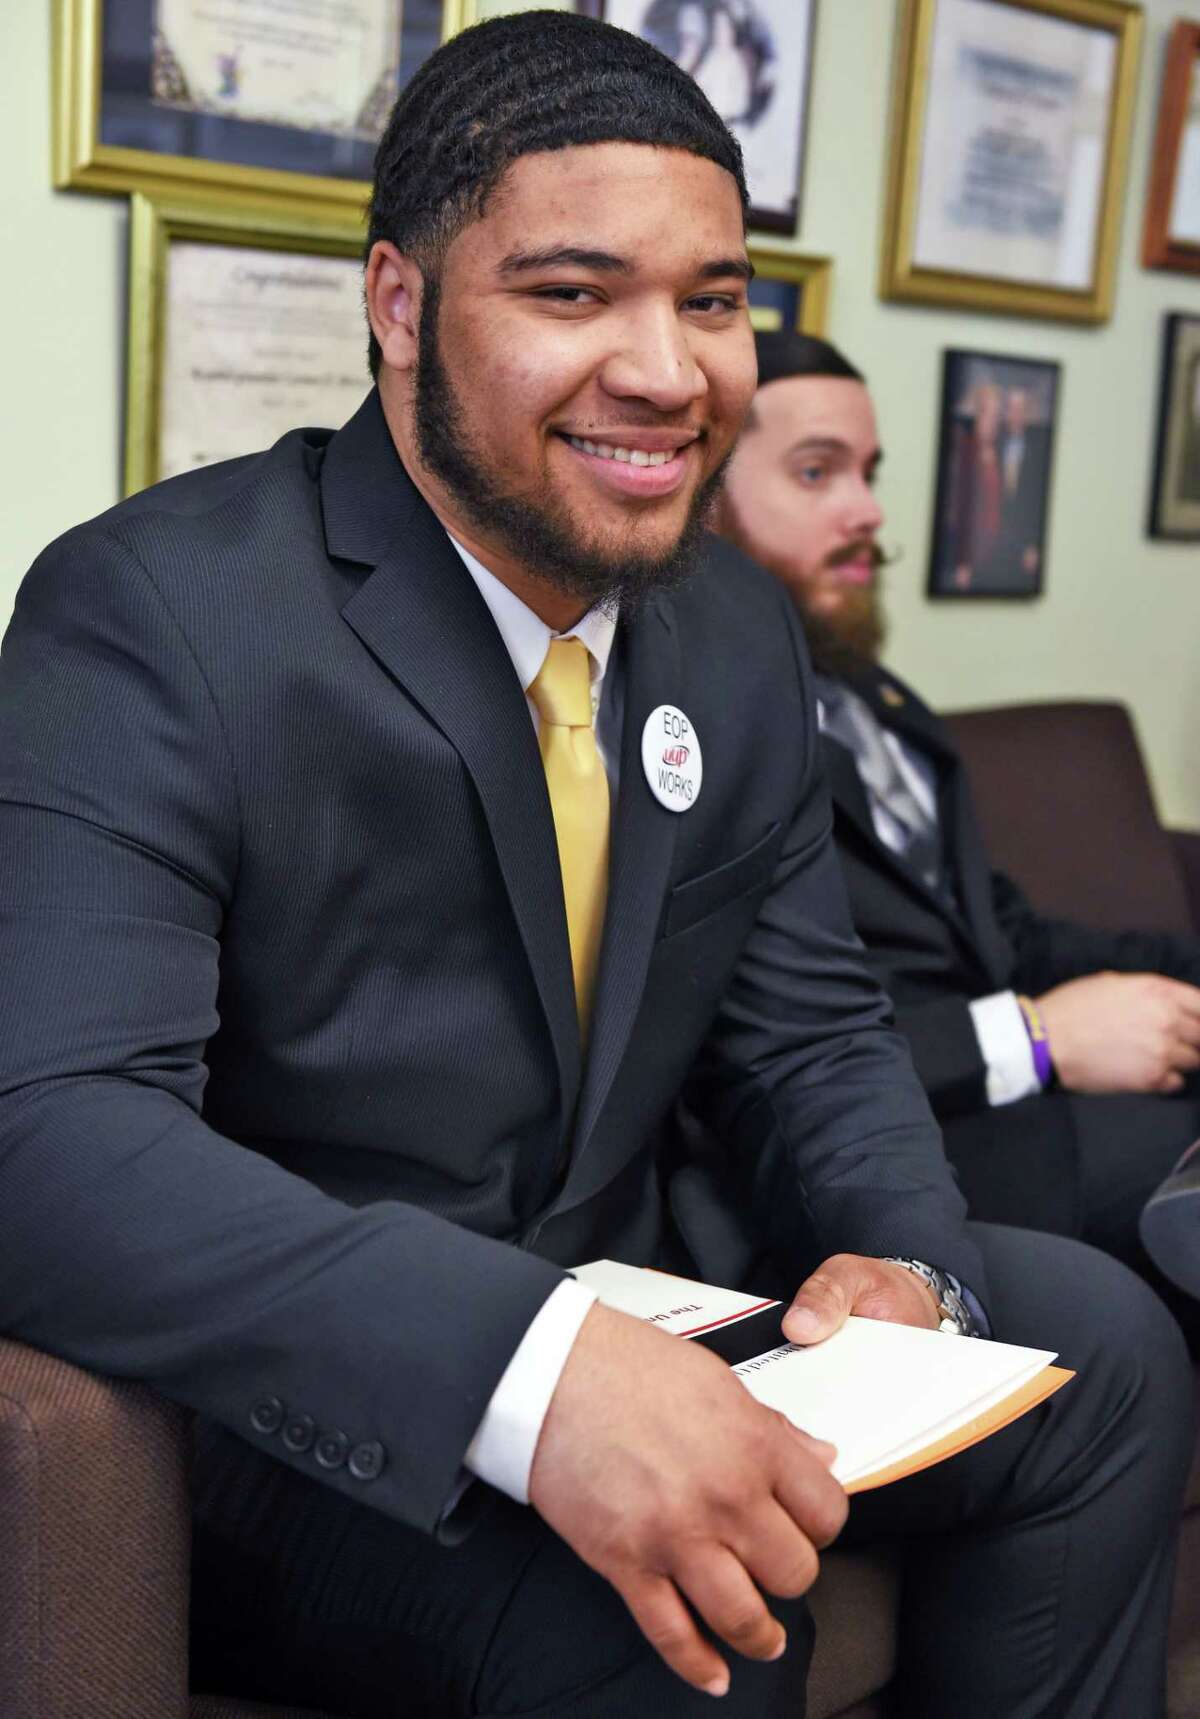 Moises Urena a SUNY student who grew up homeless lobbies for increased state aid during a visit to the Capitol Wednesday March 8, 2017 in Albany, NY. (John Carl D'Annibale / Times Union)